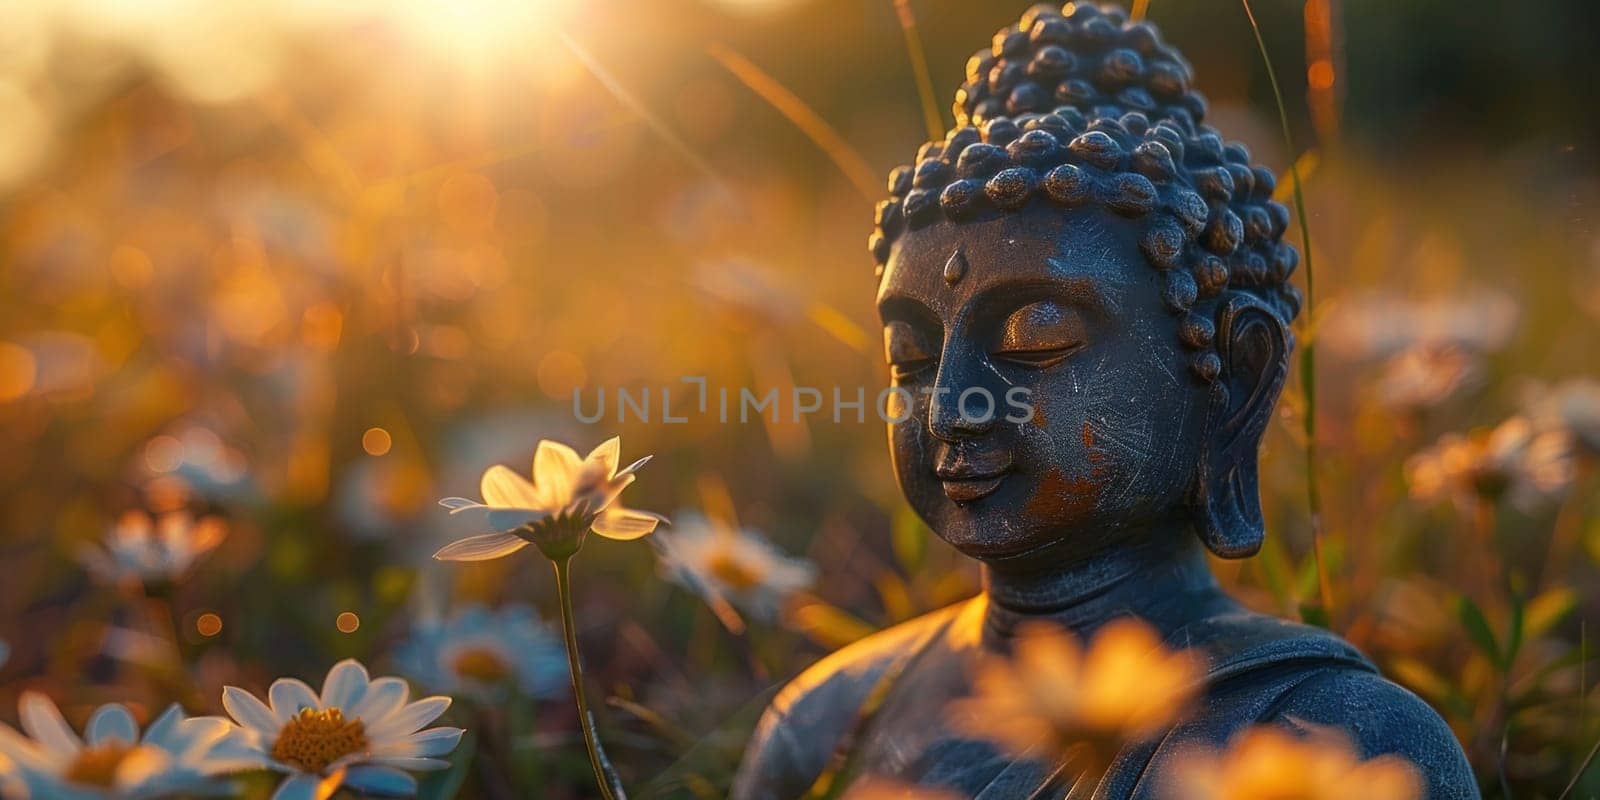 Buddha Statue Sitting in Field of Daisies by but_photo